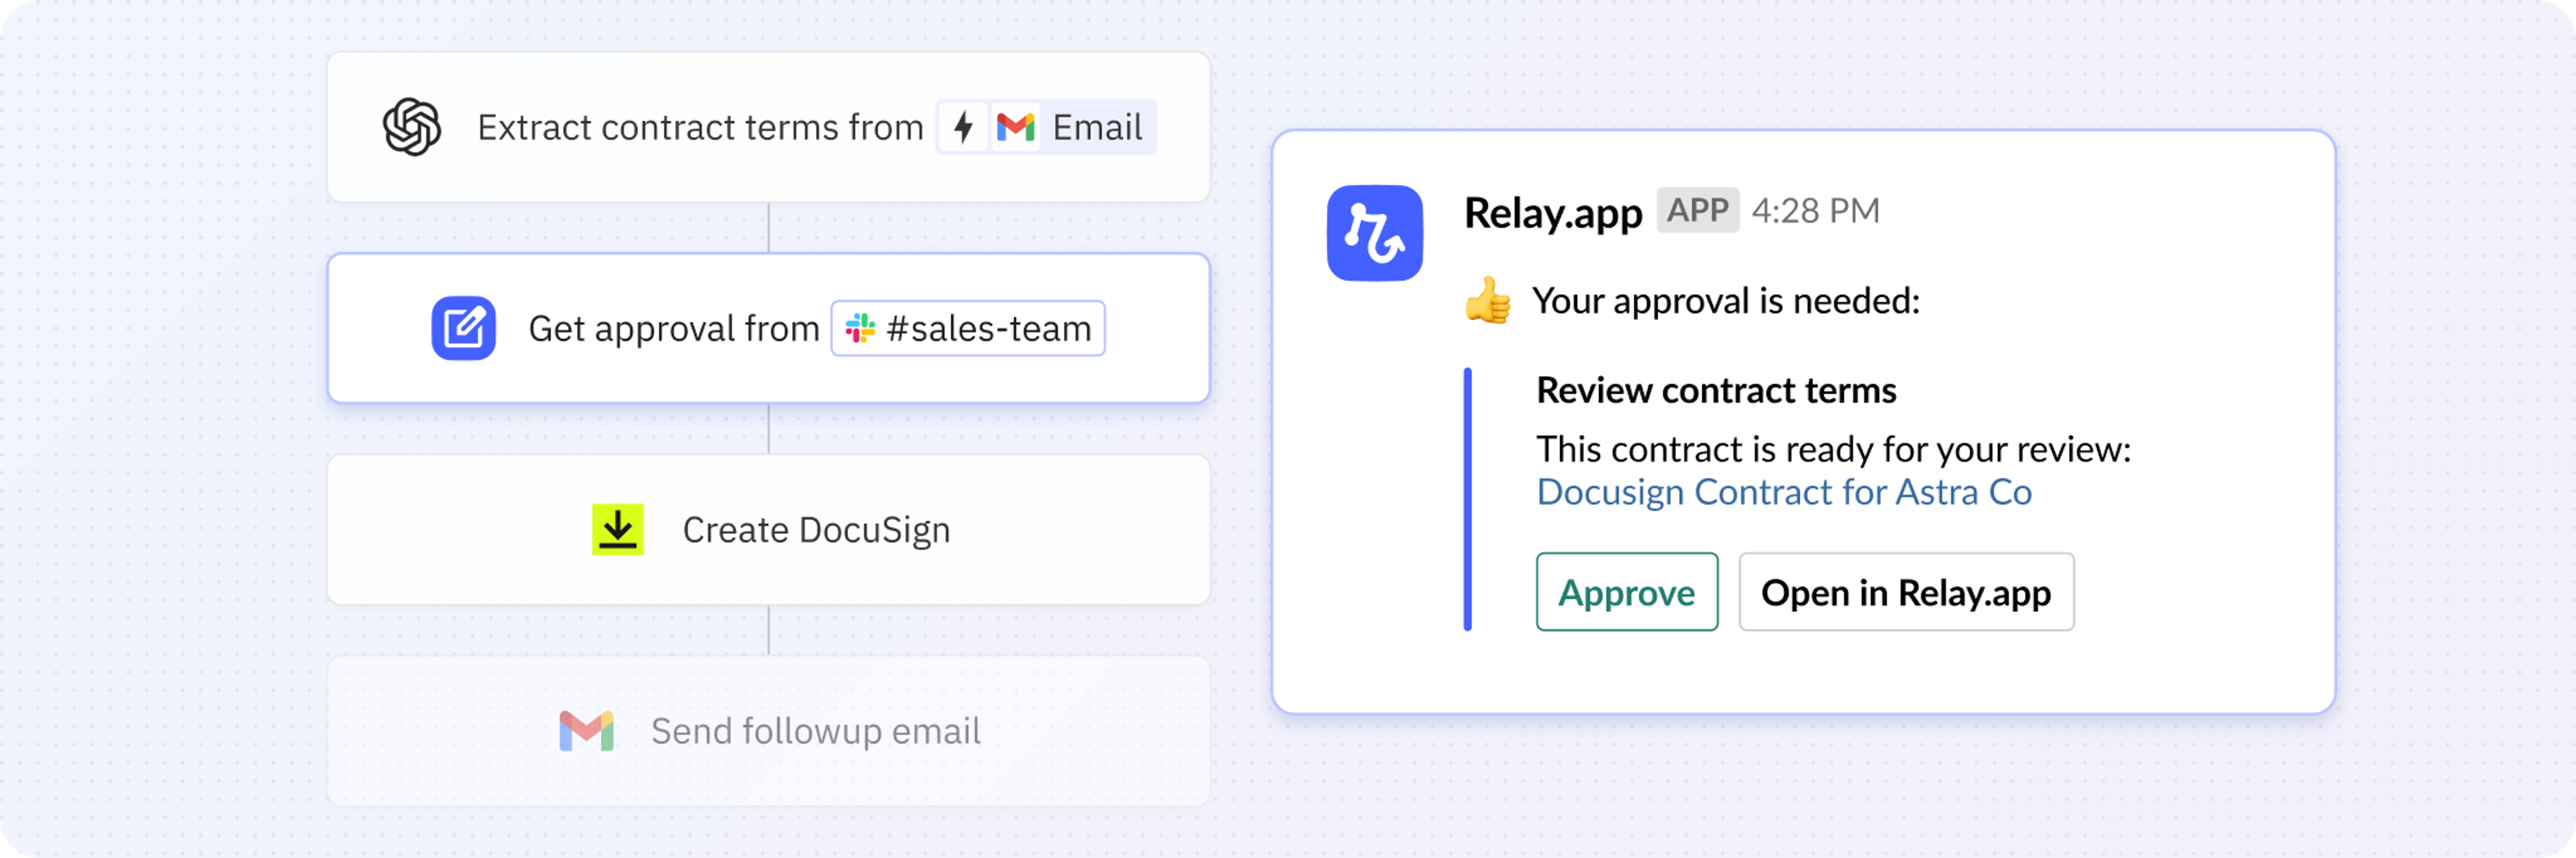 Visualization of how to use human approval or data input anywhere in an automated Relay.app workflow